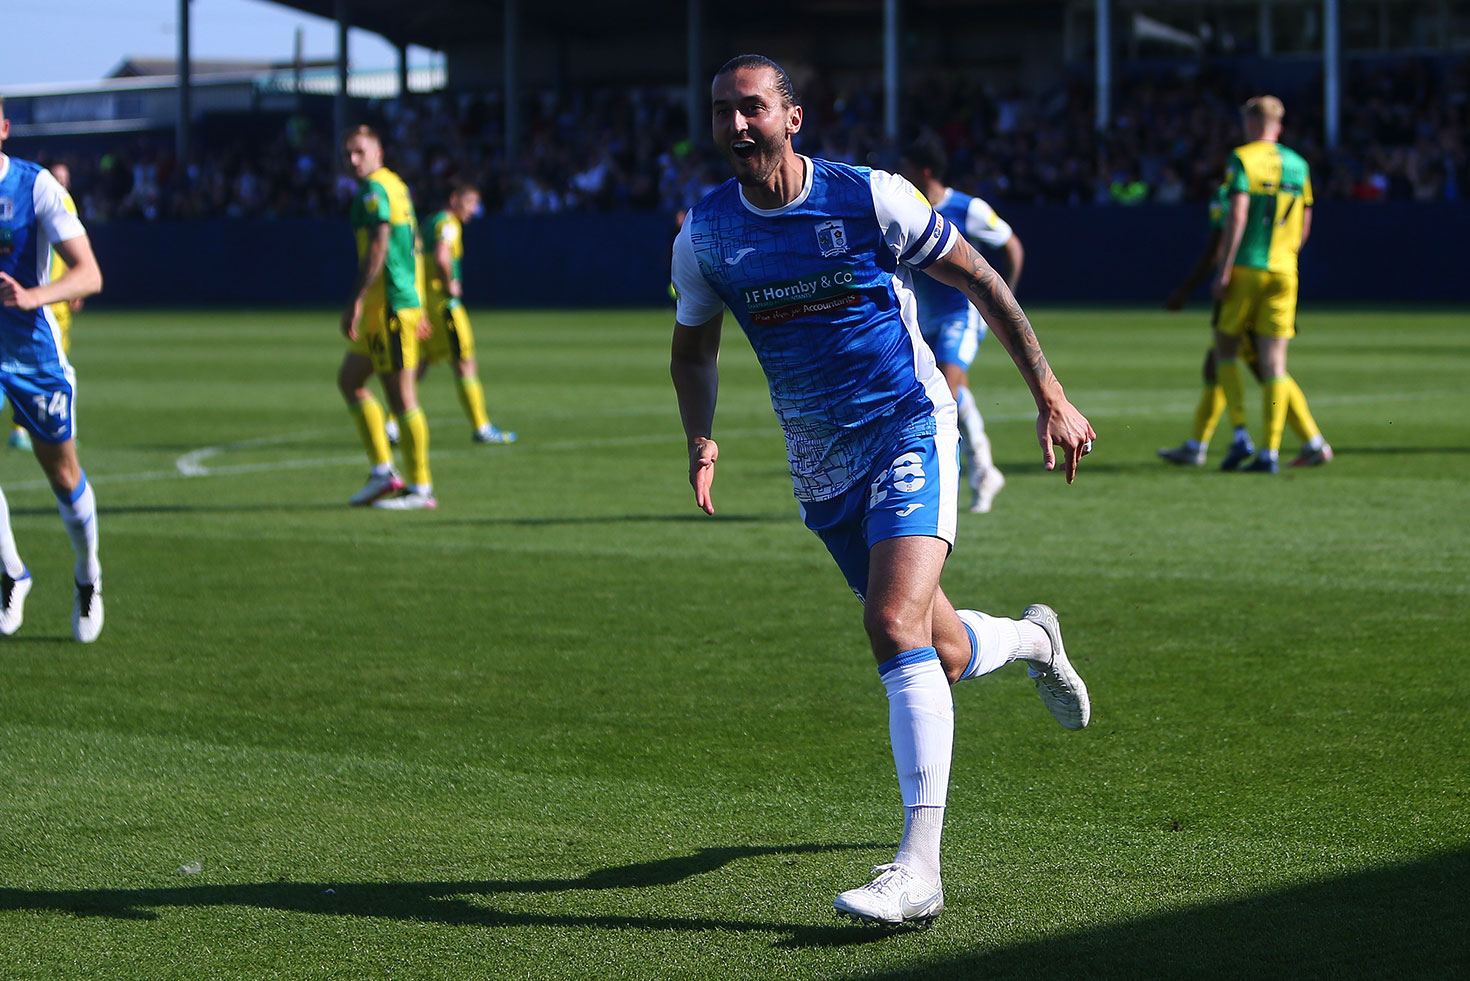 Getting the lowdown on Barrow | WE ARE FGR